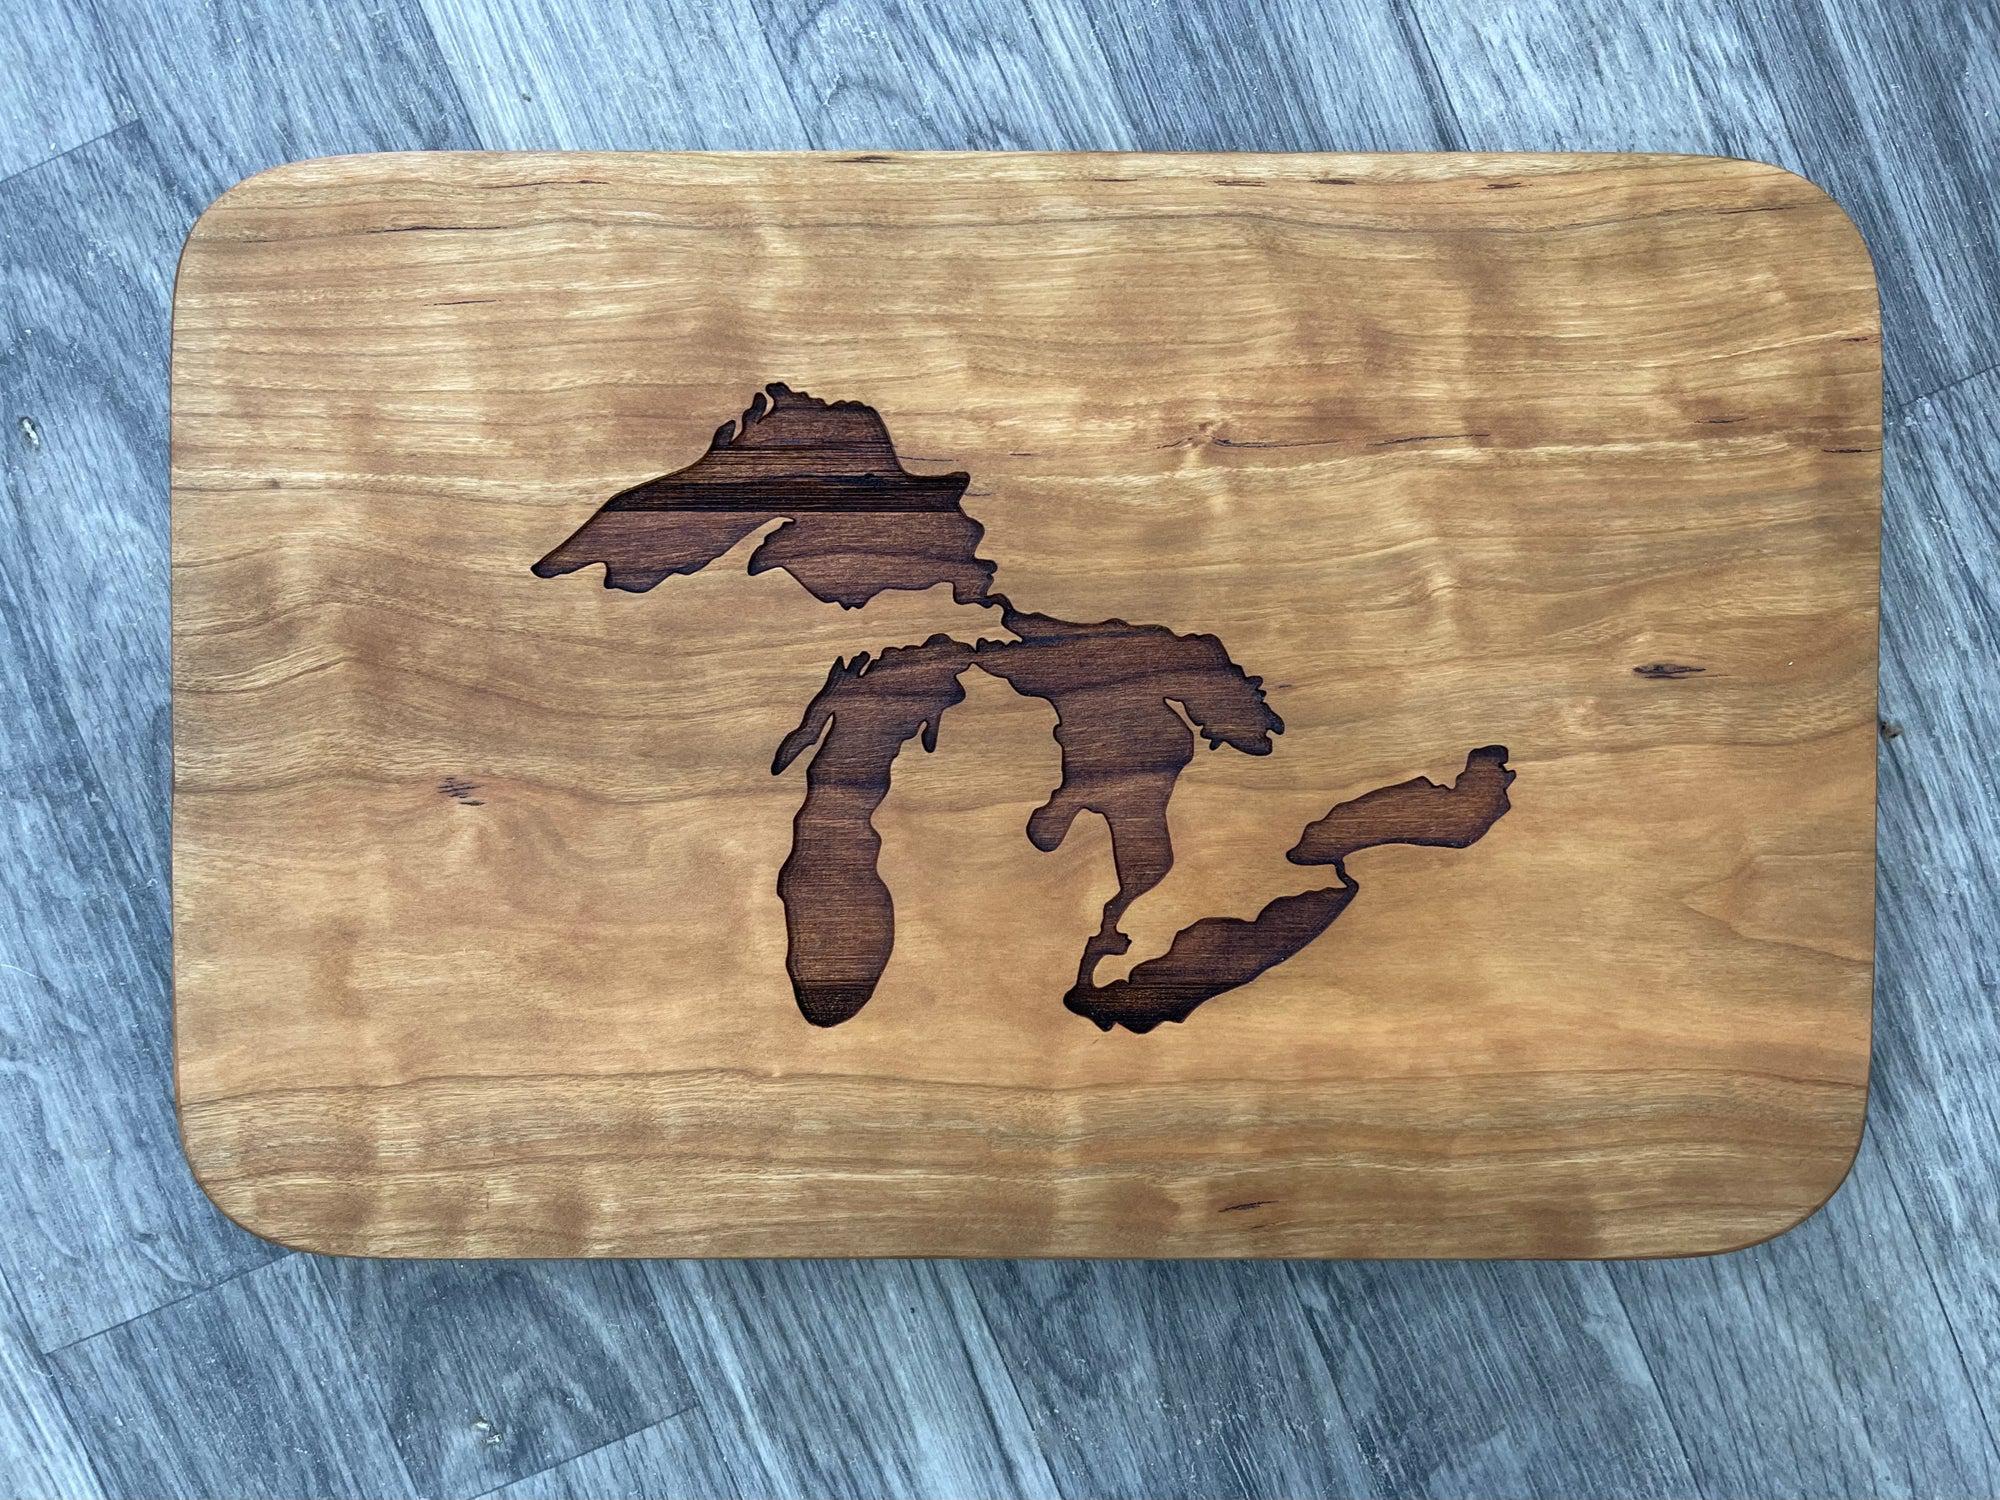 Great Lakes Handmade Cherry Wood Engraved Cutting Board